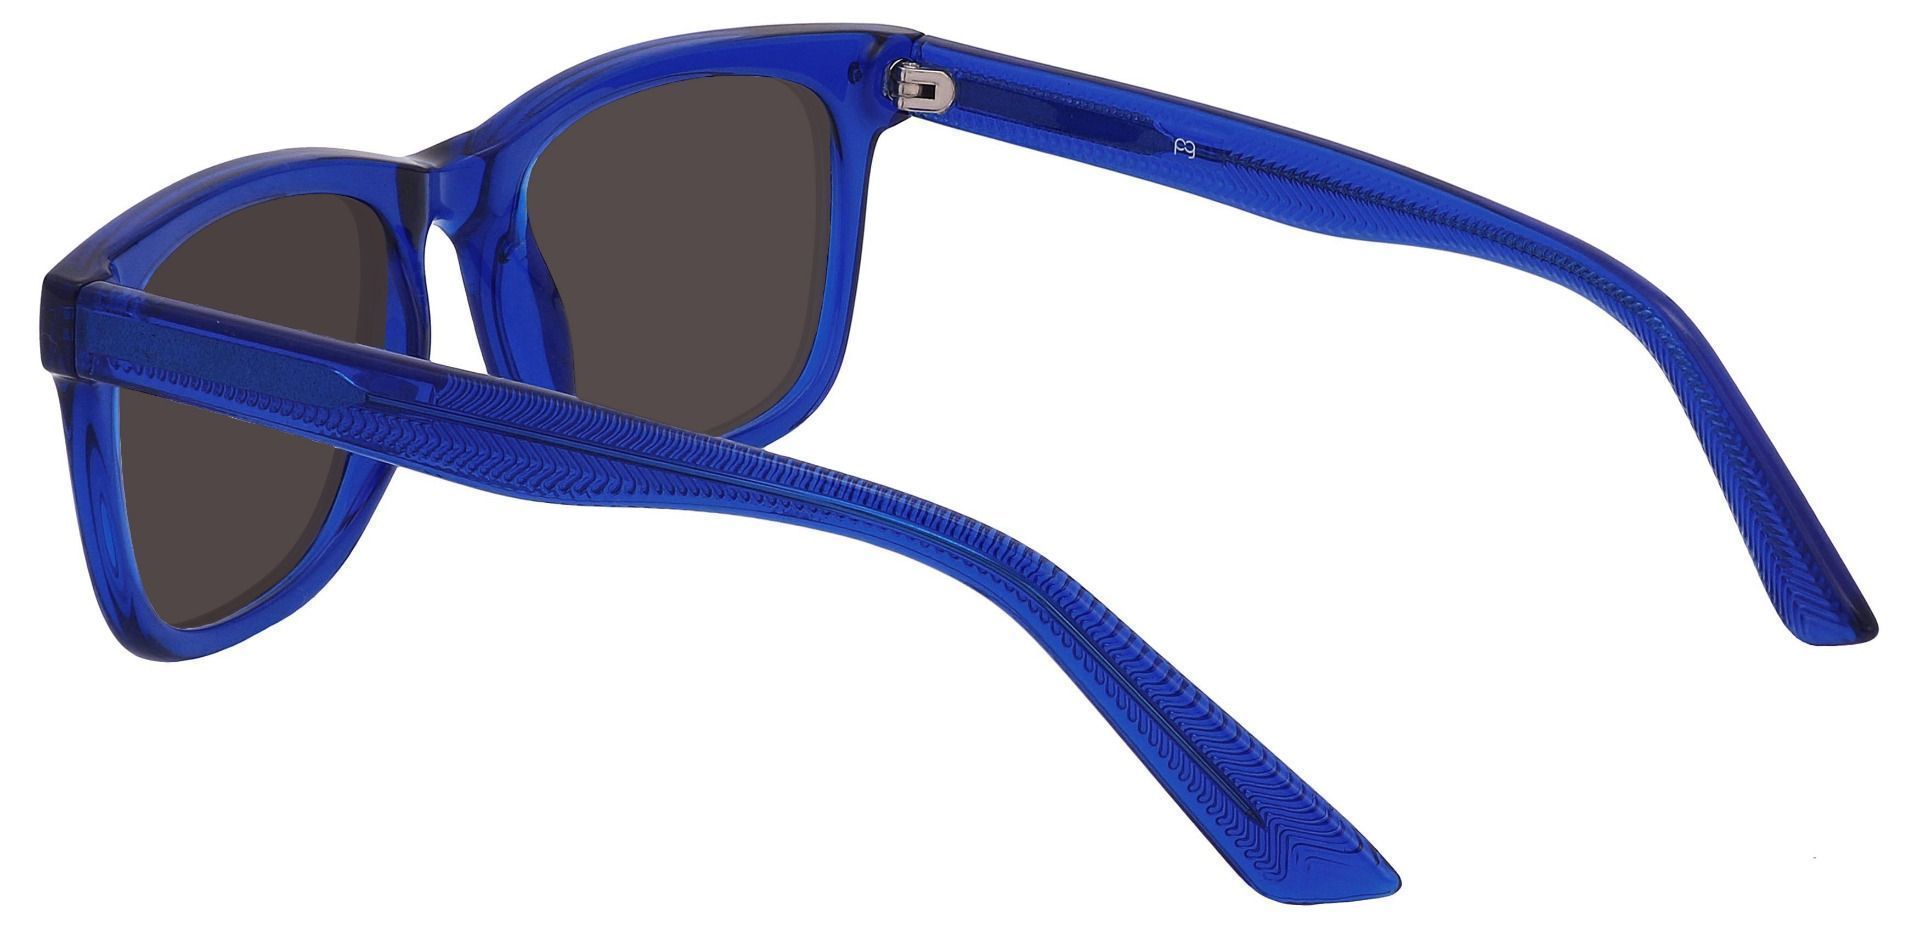 McKinley Square Non-Rx Sunglasses - Blue Frame With Gray Lenses